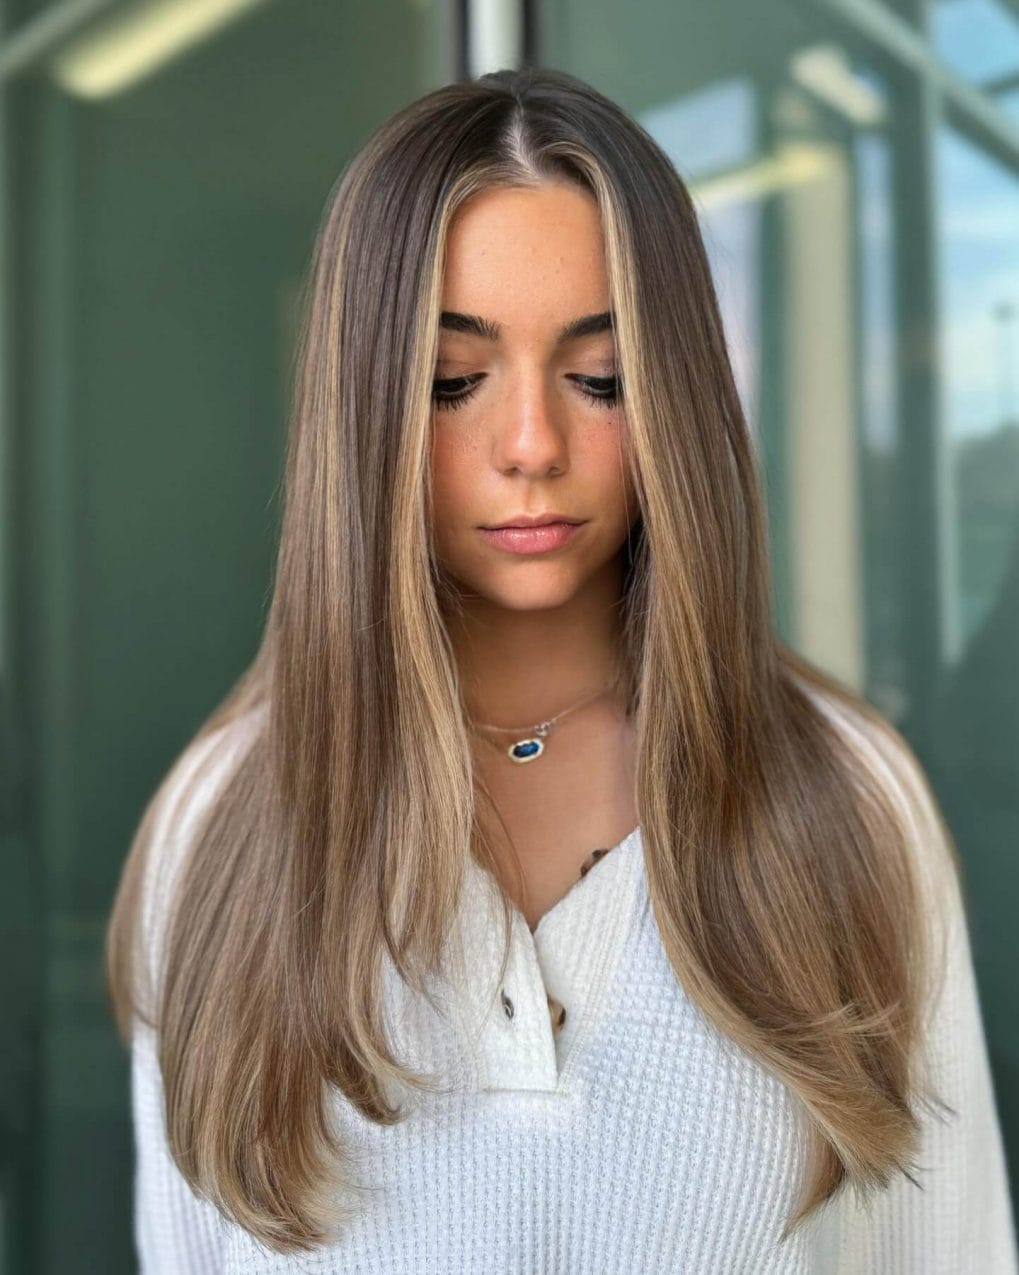 Long sleek hairstyle with subtle layers for thicker look